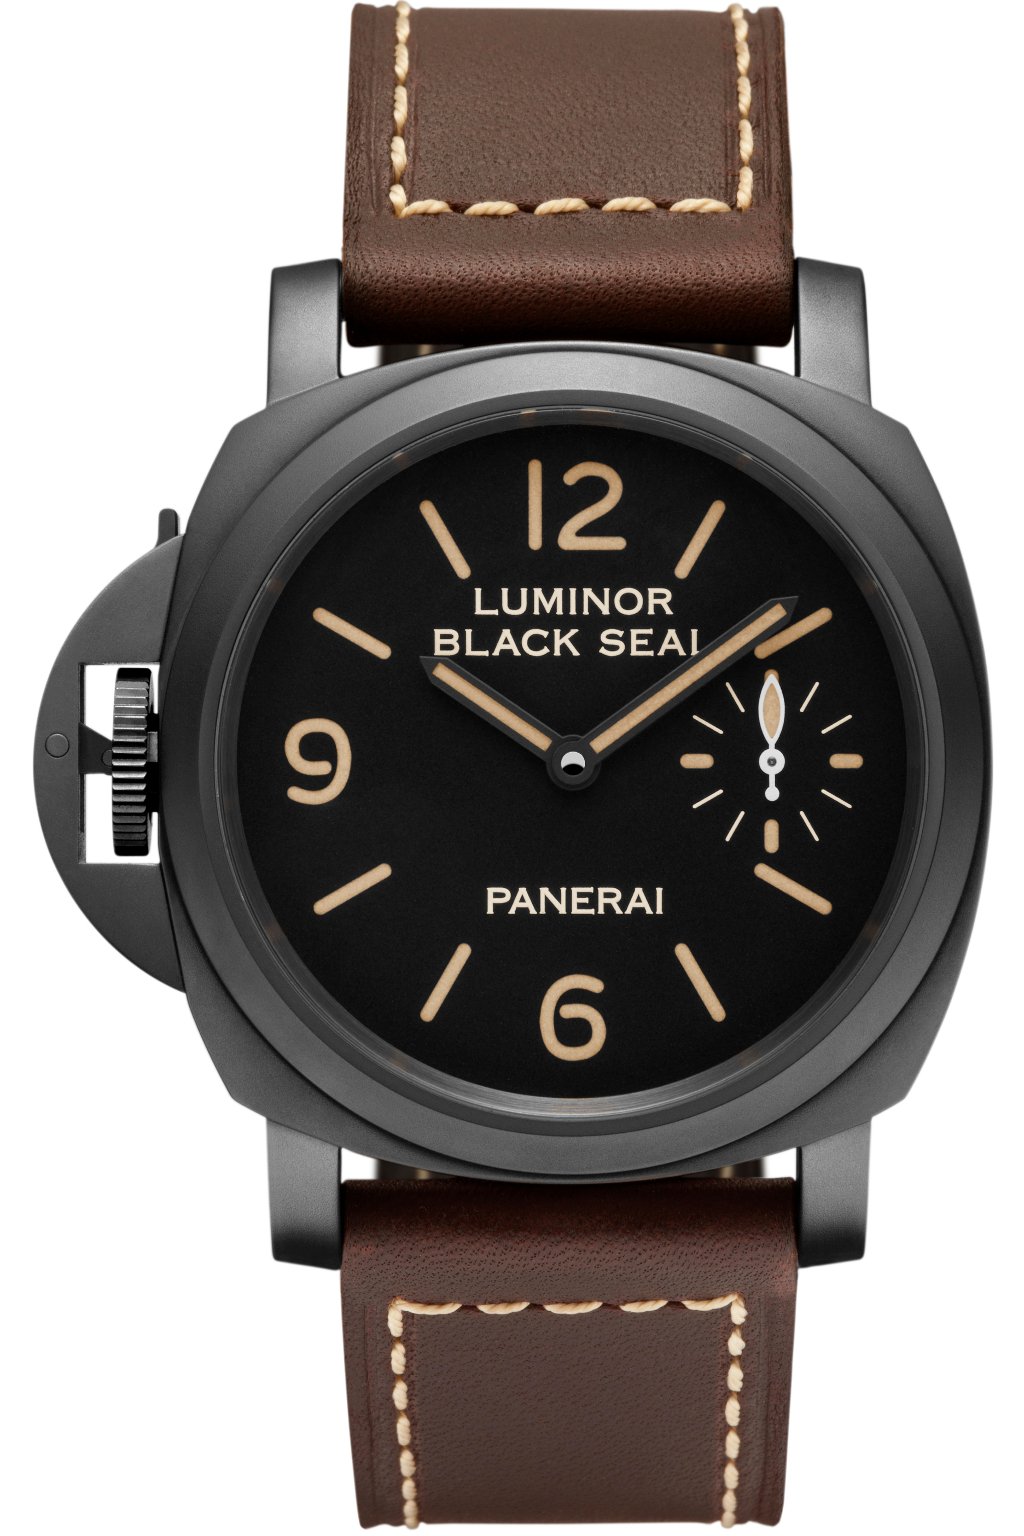 The PAM 786 Luminor Black Seal Left-Handed 8 Days